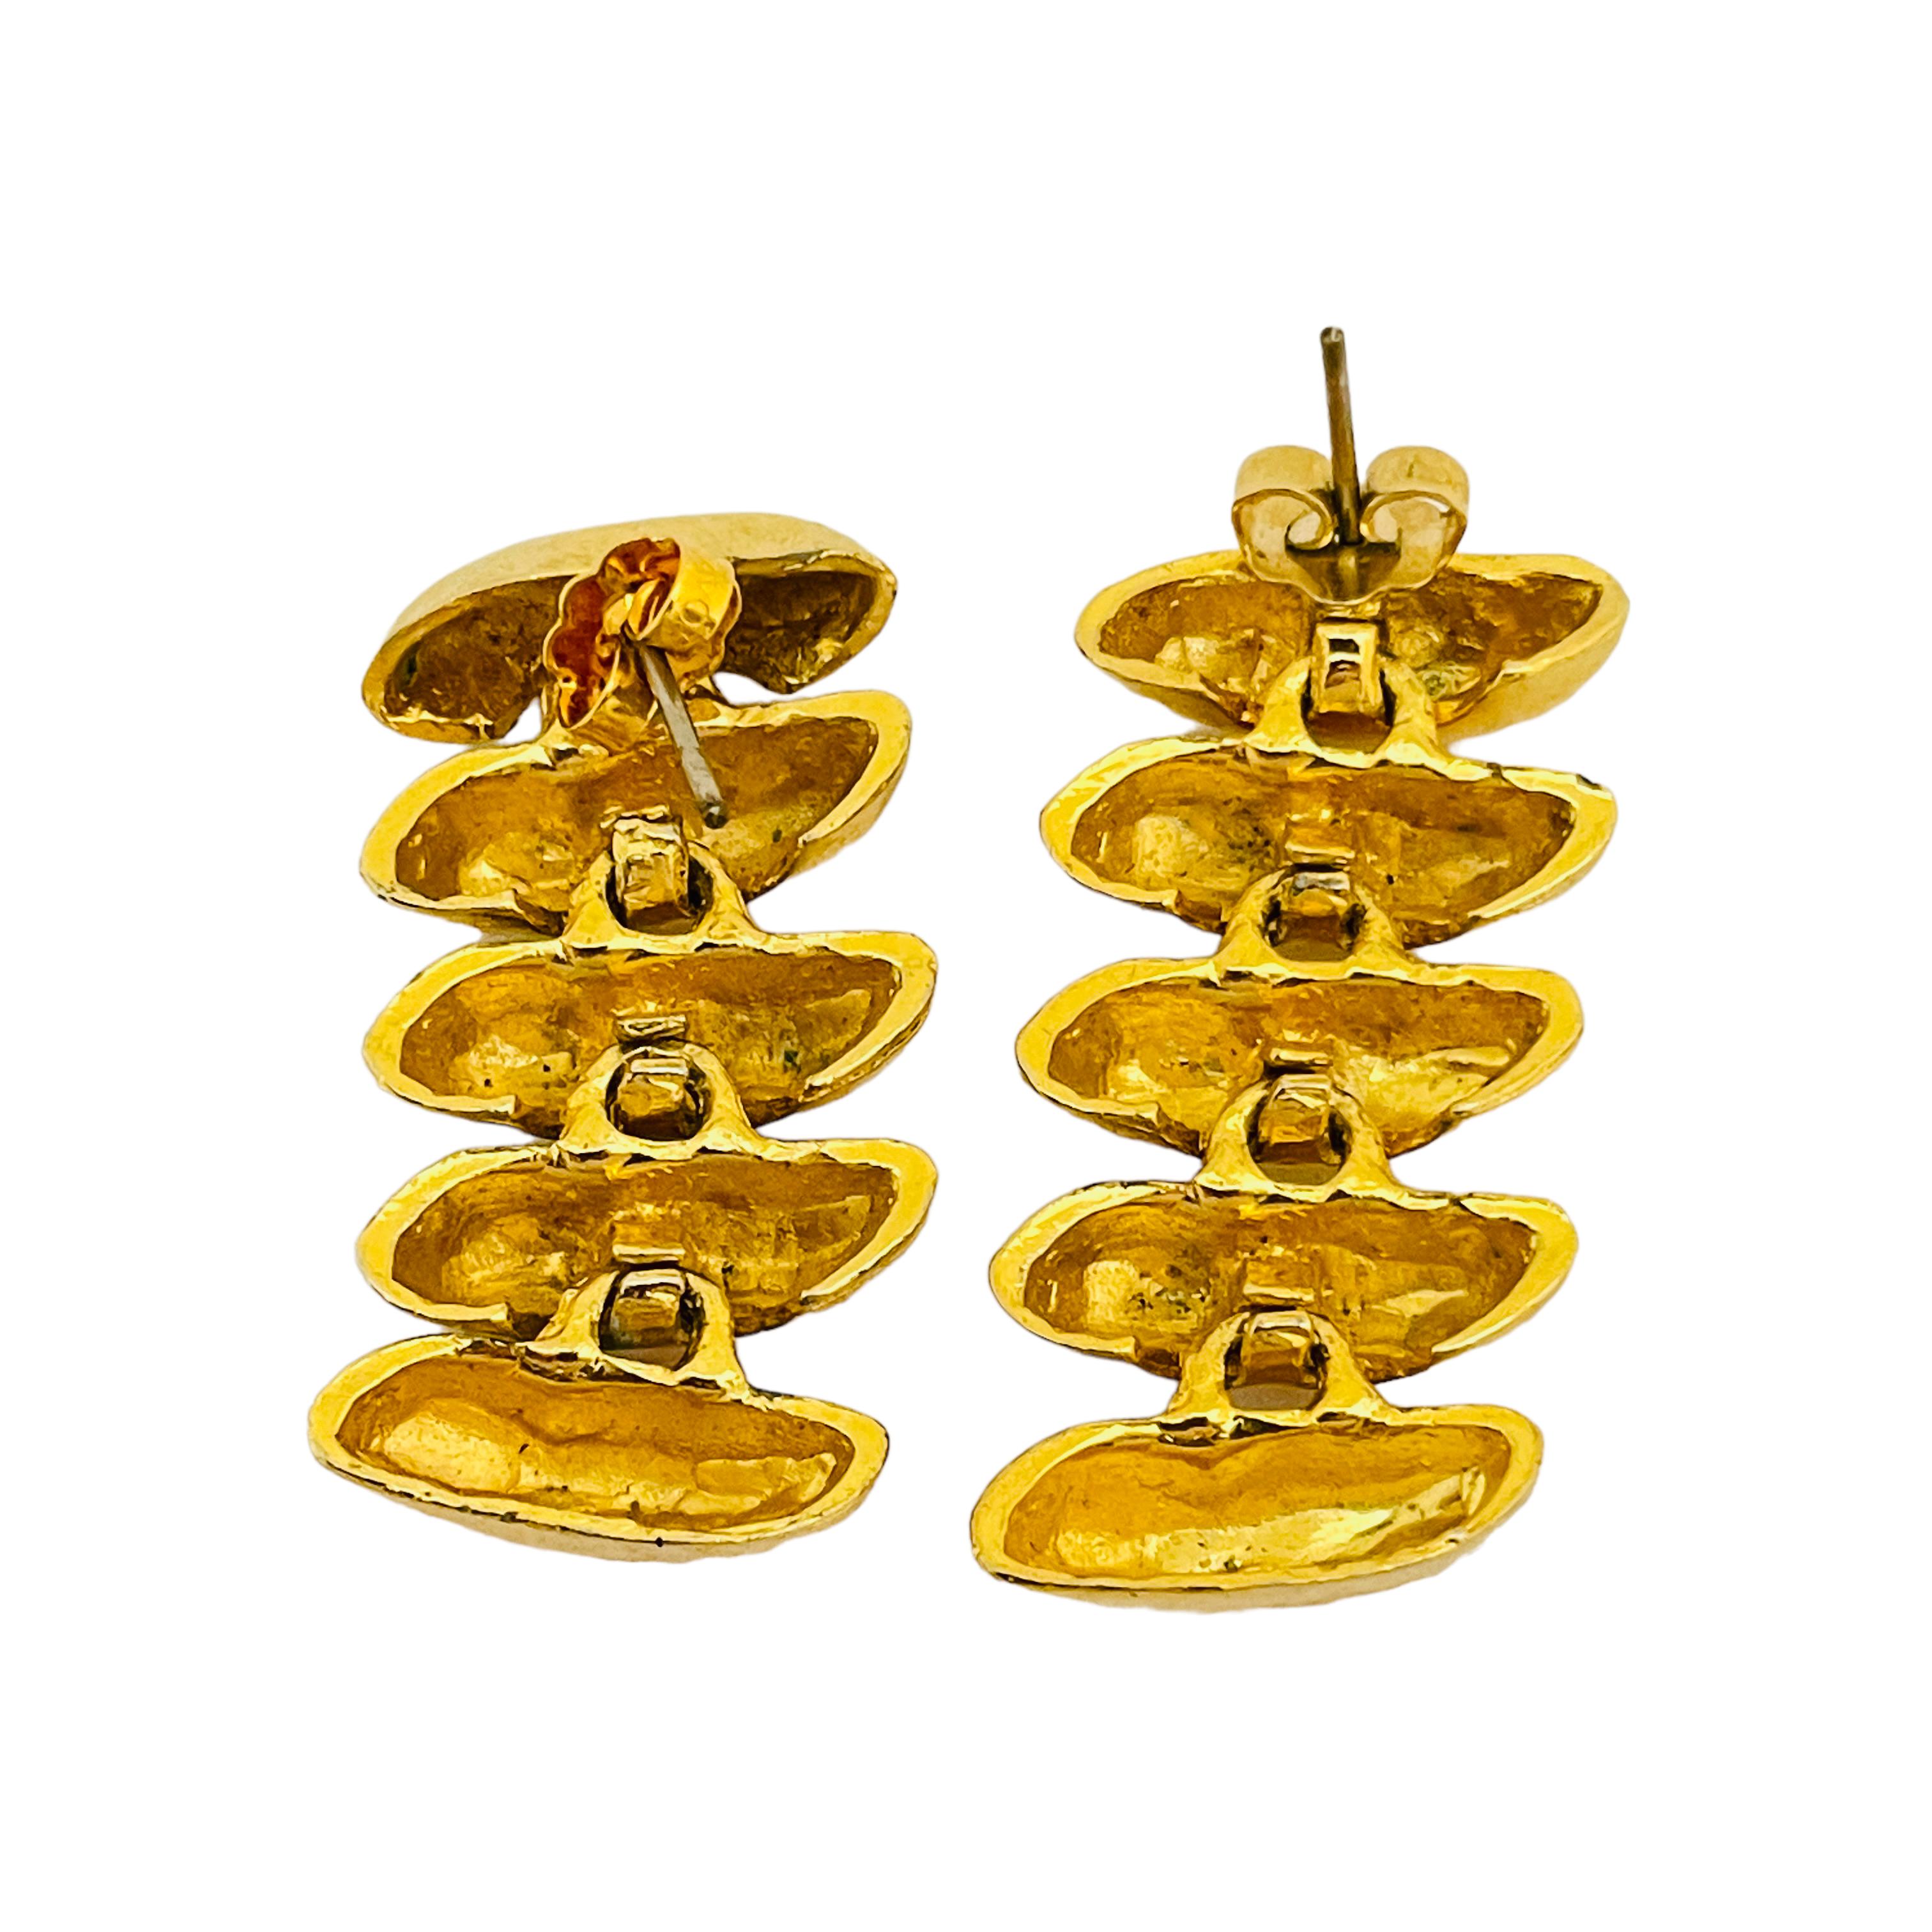 Vintage gold shiny modernist drop designer runway earrings In Good Condition For Sale In Palos Hills, IL